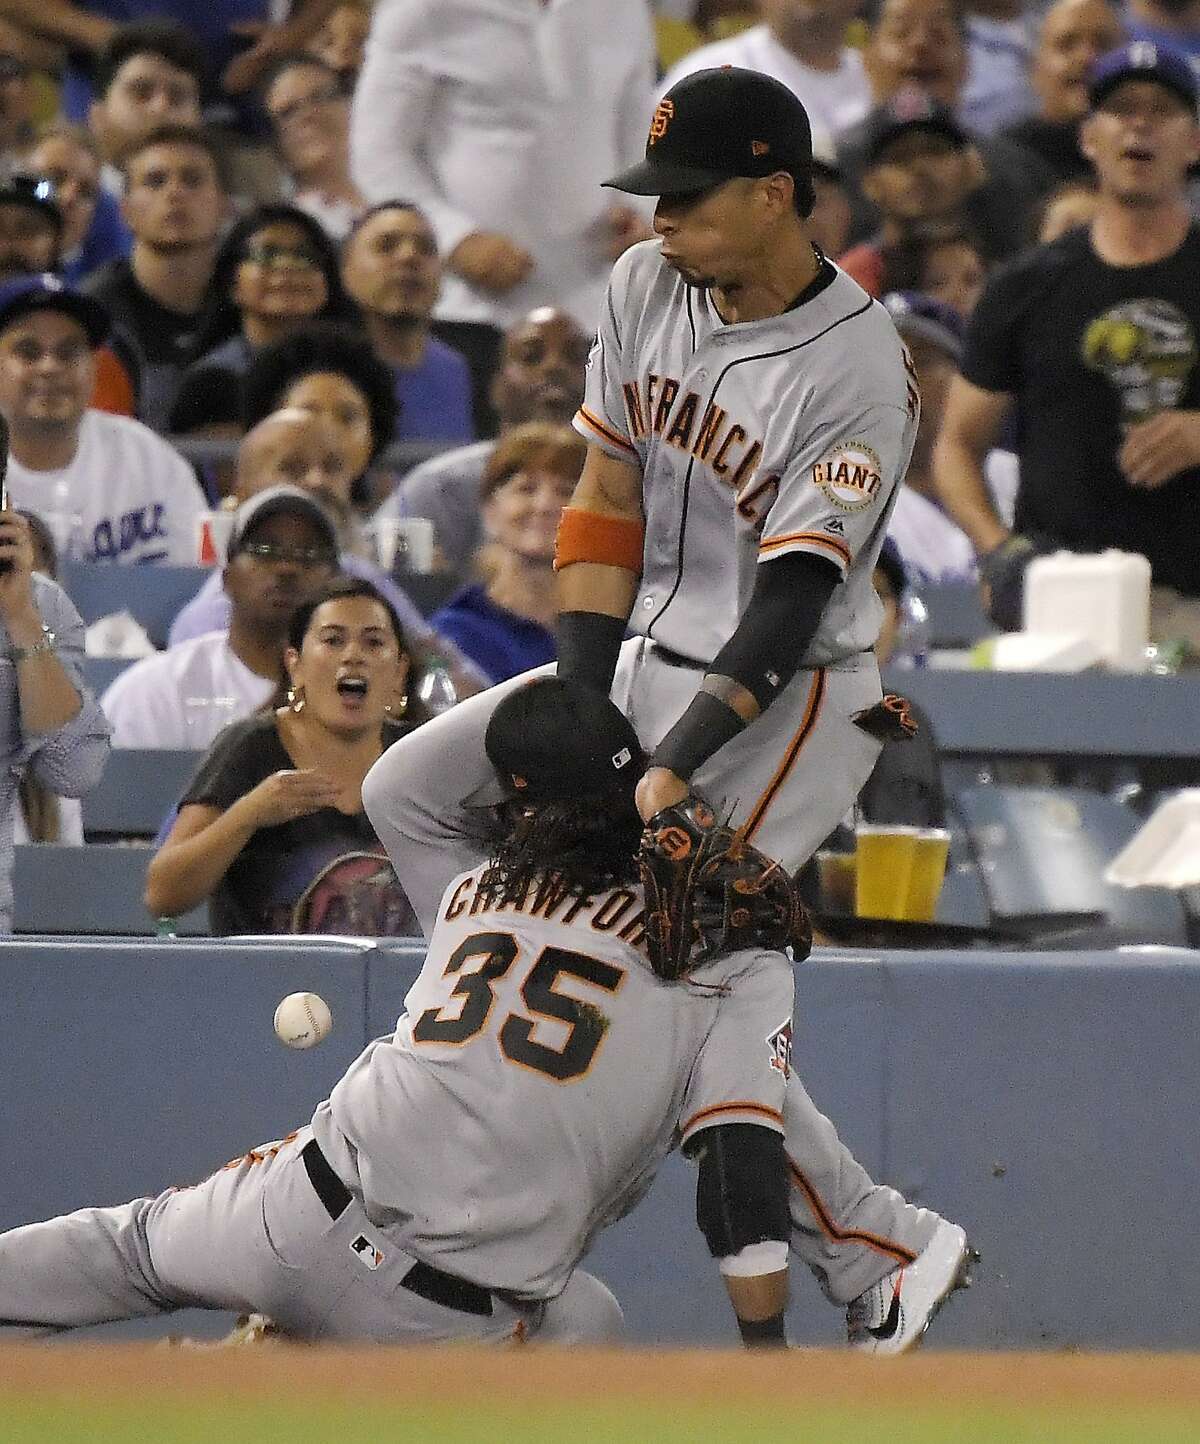 San Francisco Giants left fielder Gorkys Hernandez, top, collides with shortstop Brandon Crawford as they try to field a ball hit for an RBI double by Los Angeles Dodgers' Clayton Kershaw during the fourth inning of a baseball game Monday, Aug. 13, 2018, in Los Angeles. Kershaw was thrown out at third on the play. (AP Photo/Mark J. Terrill)